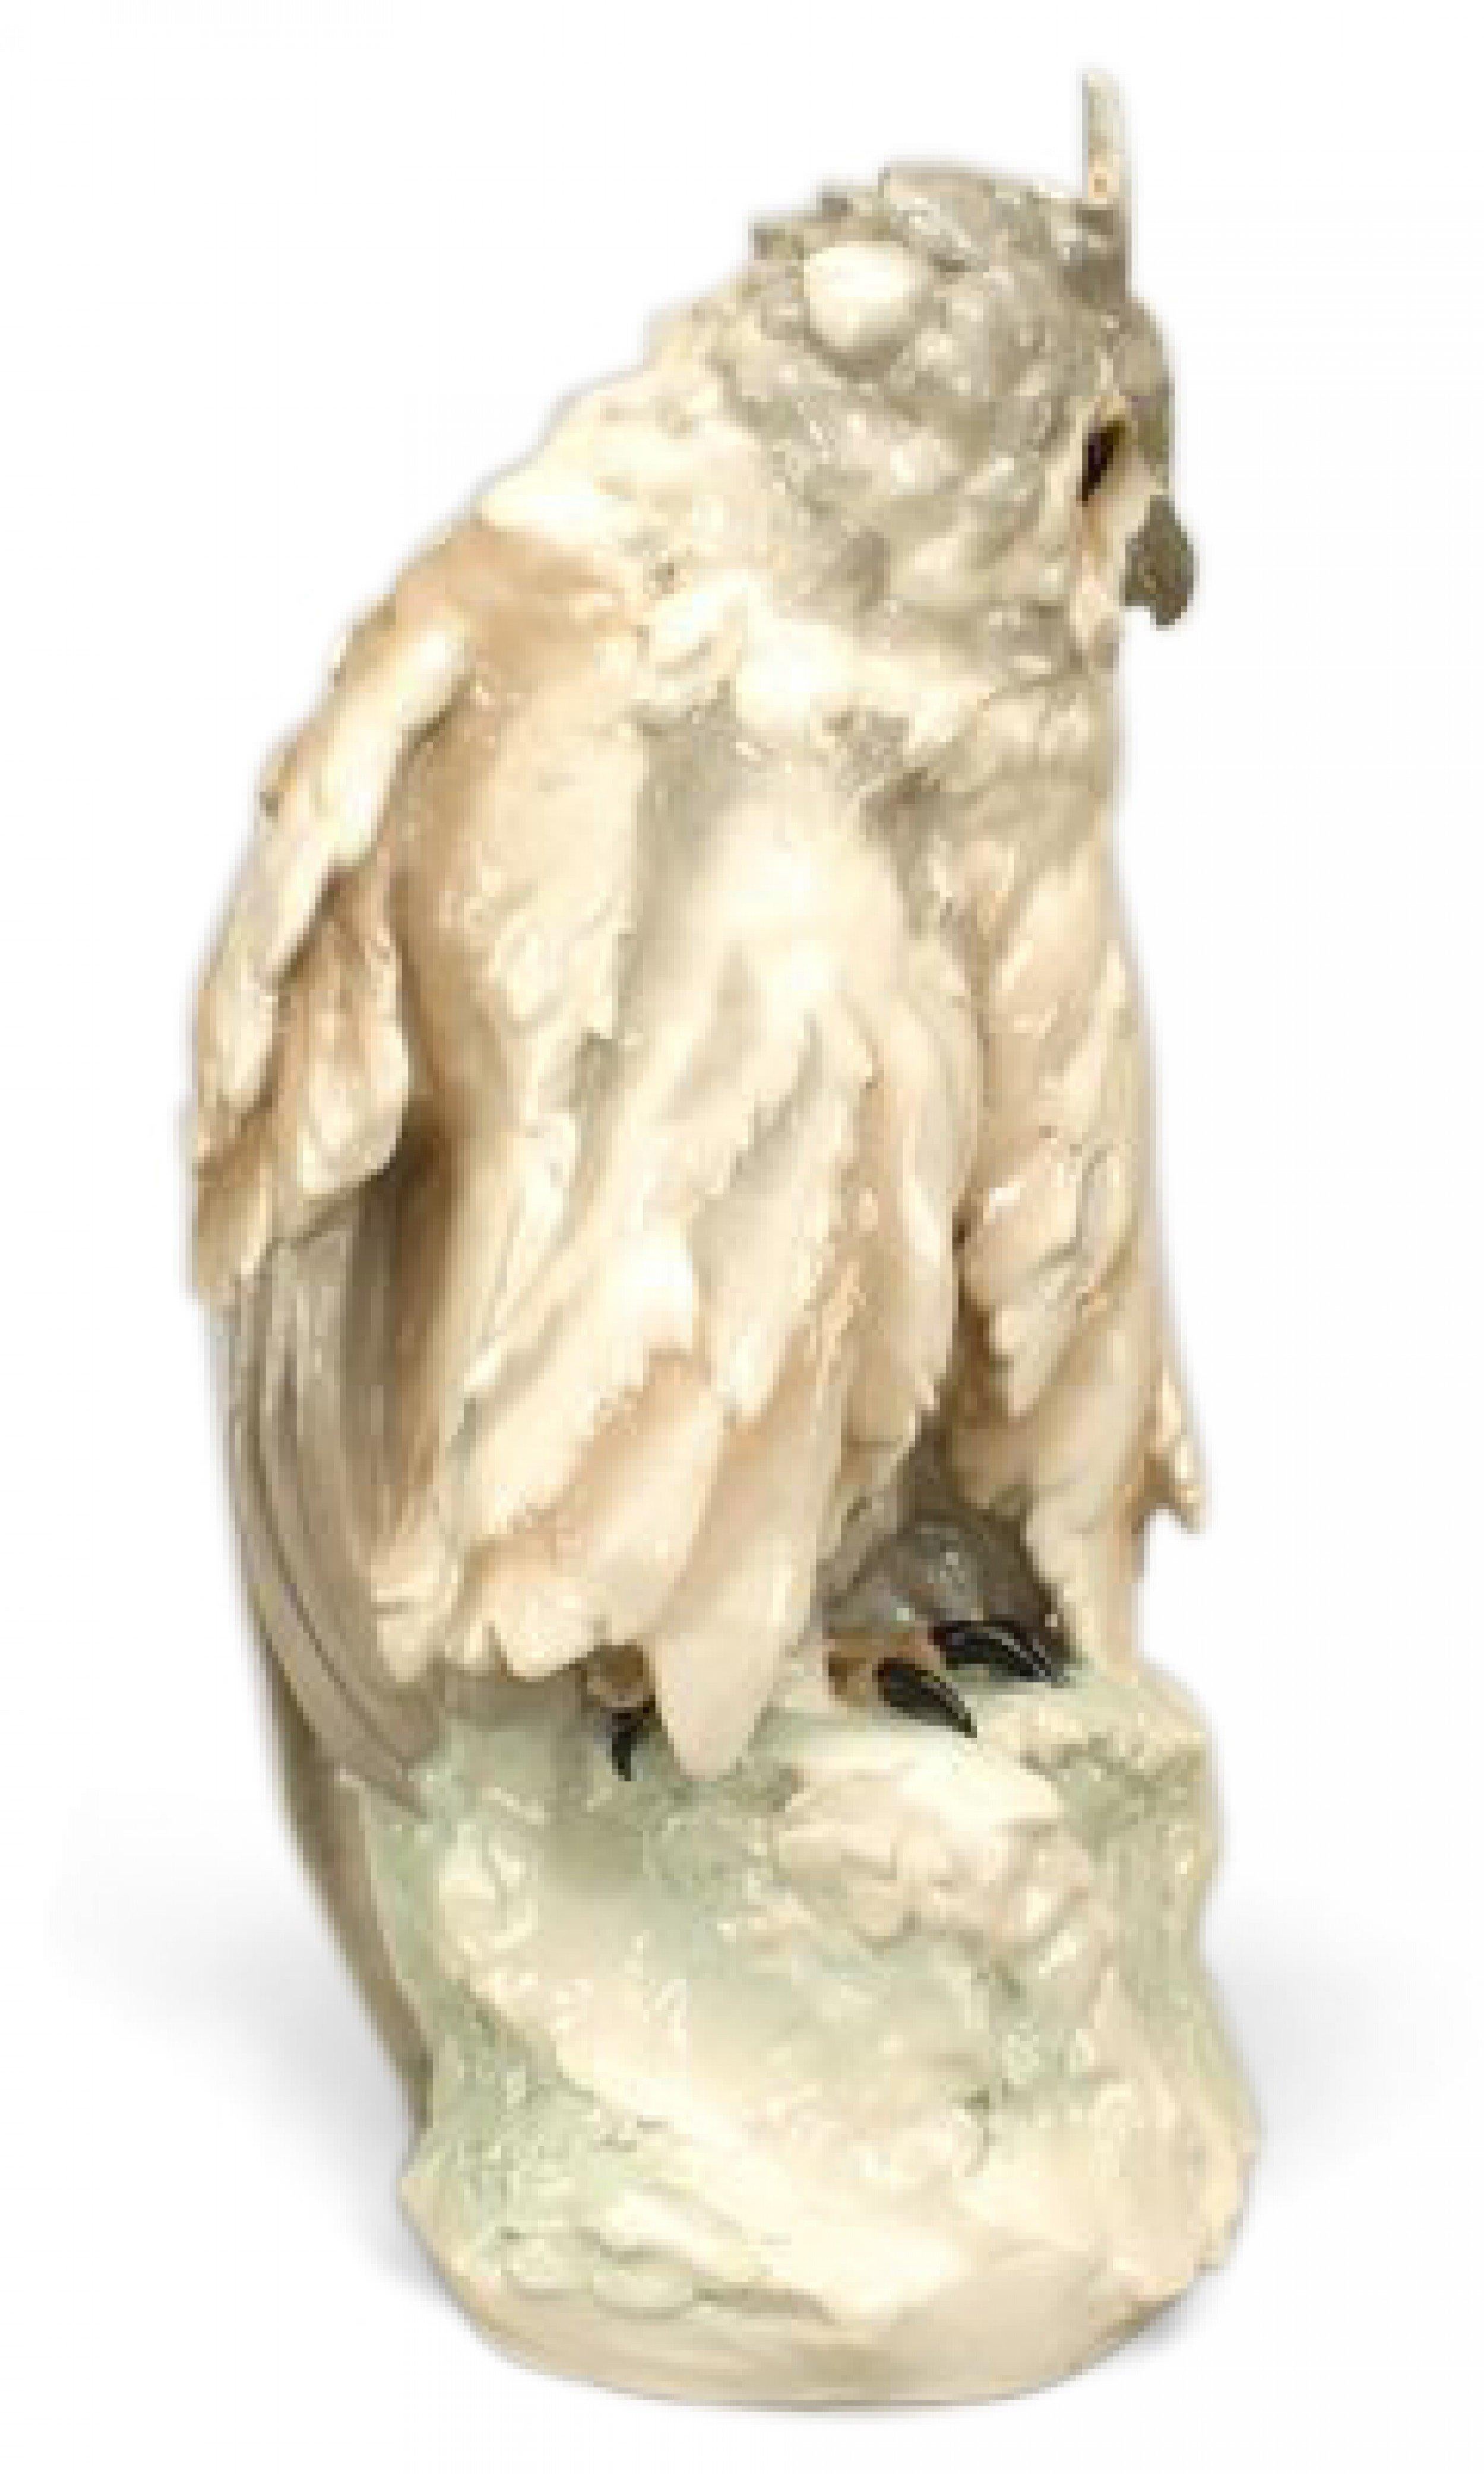 Continental Austrian style (19/20th Cent) white and grey Amphora porcelain figure of owl standing on base (signed).